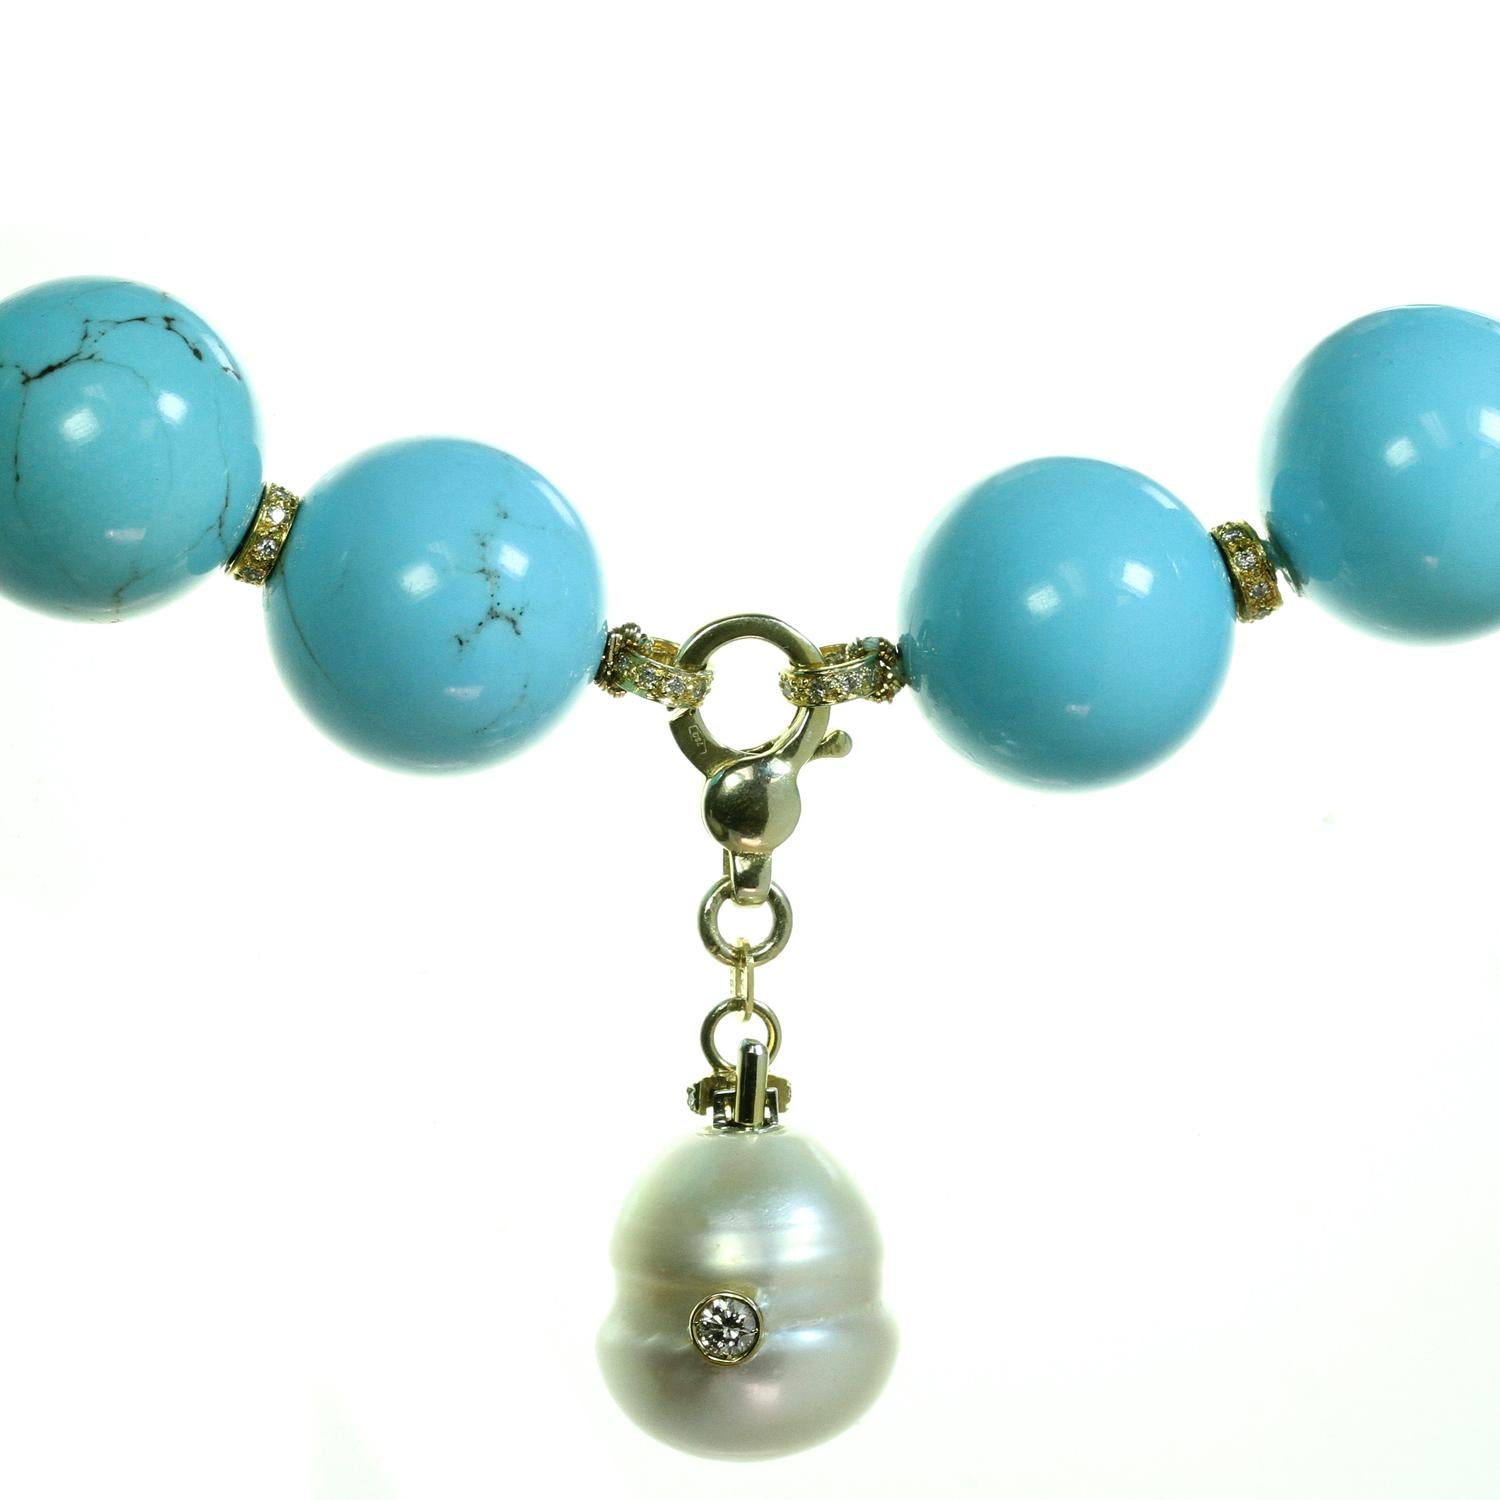 turquoise pearl necklace